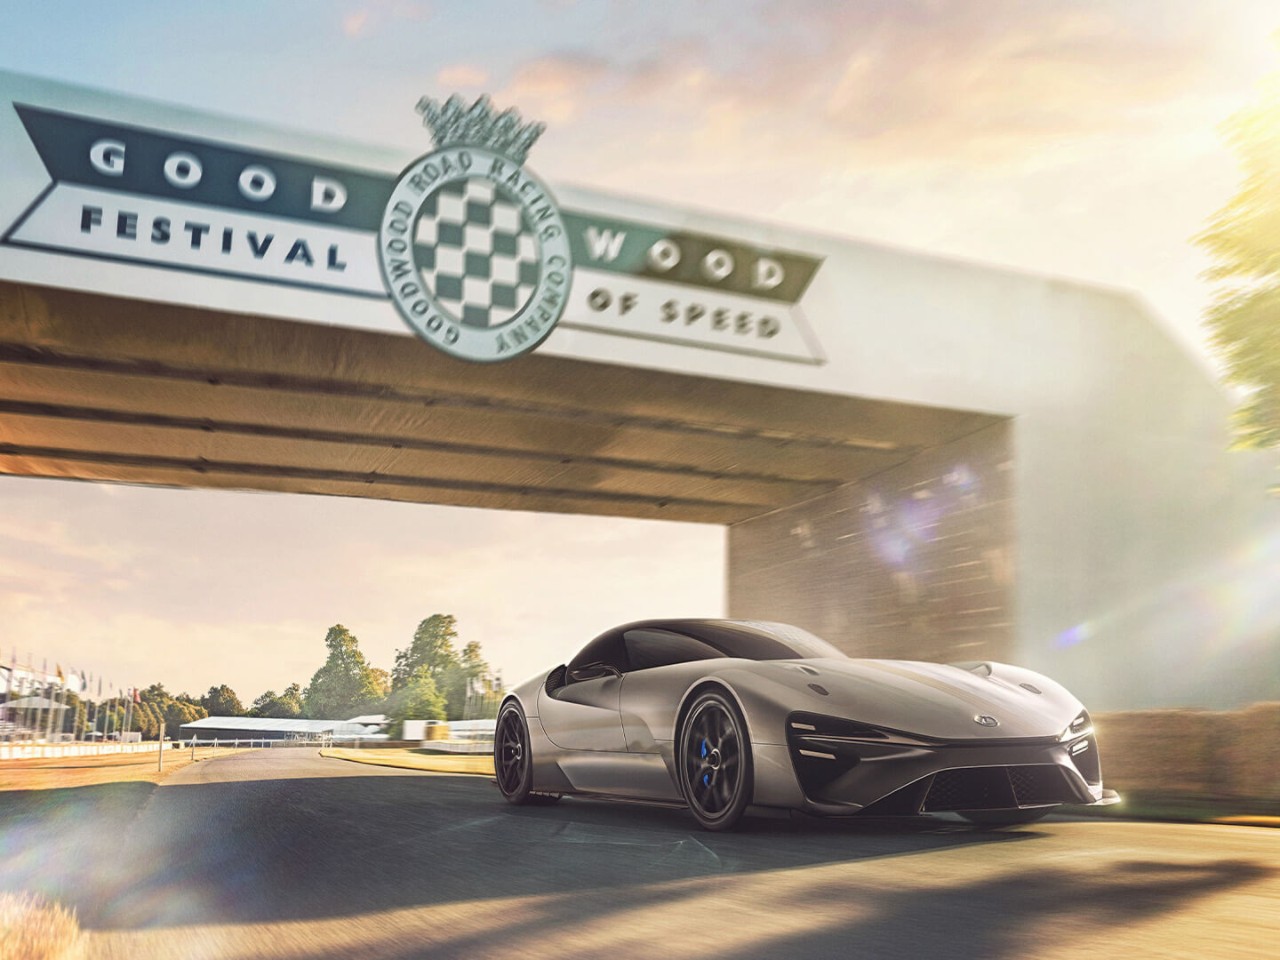 Electrified Sport Concept Debuts at Goodwood